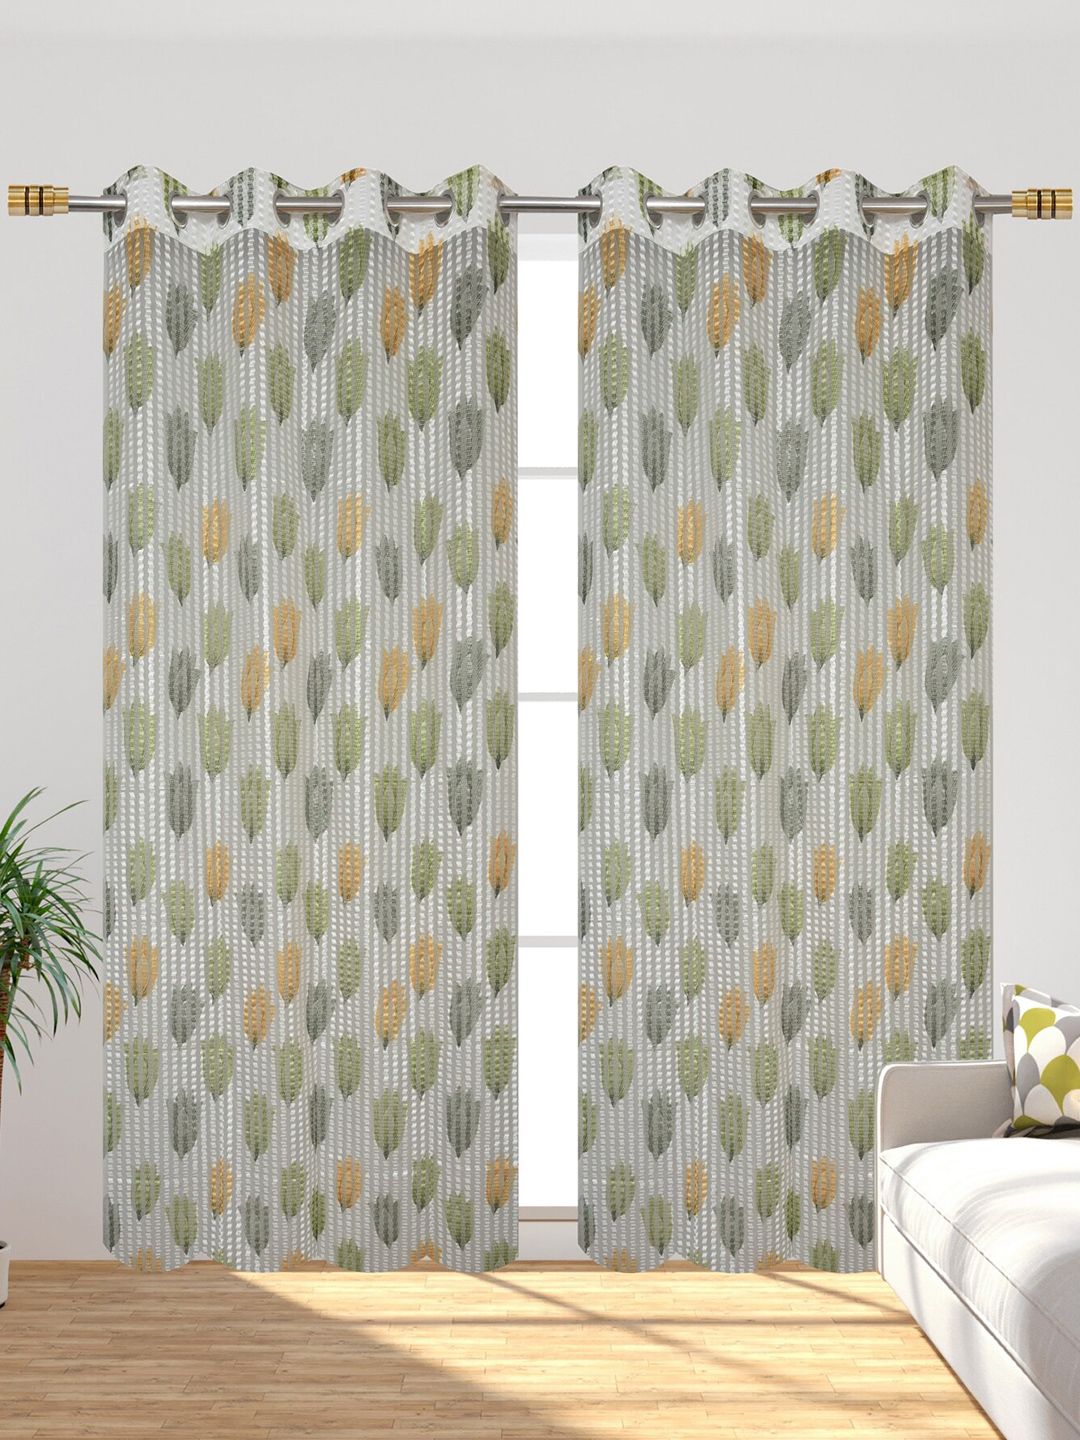 Homefab India Green Set of 2 Floral Sheer Door Curtain Price in India